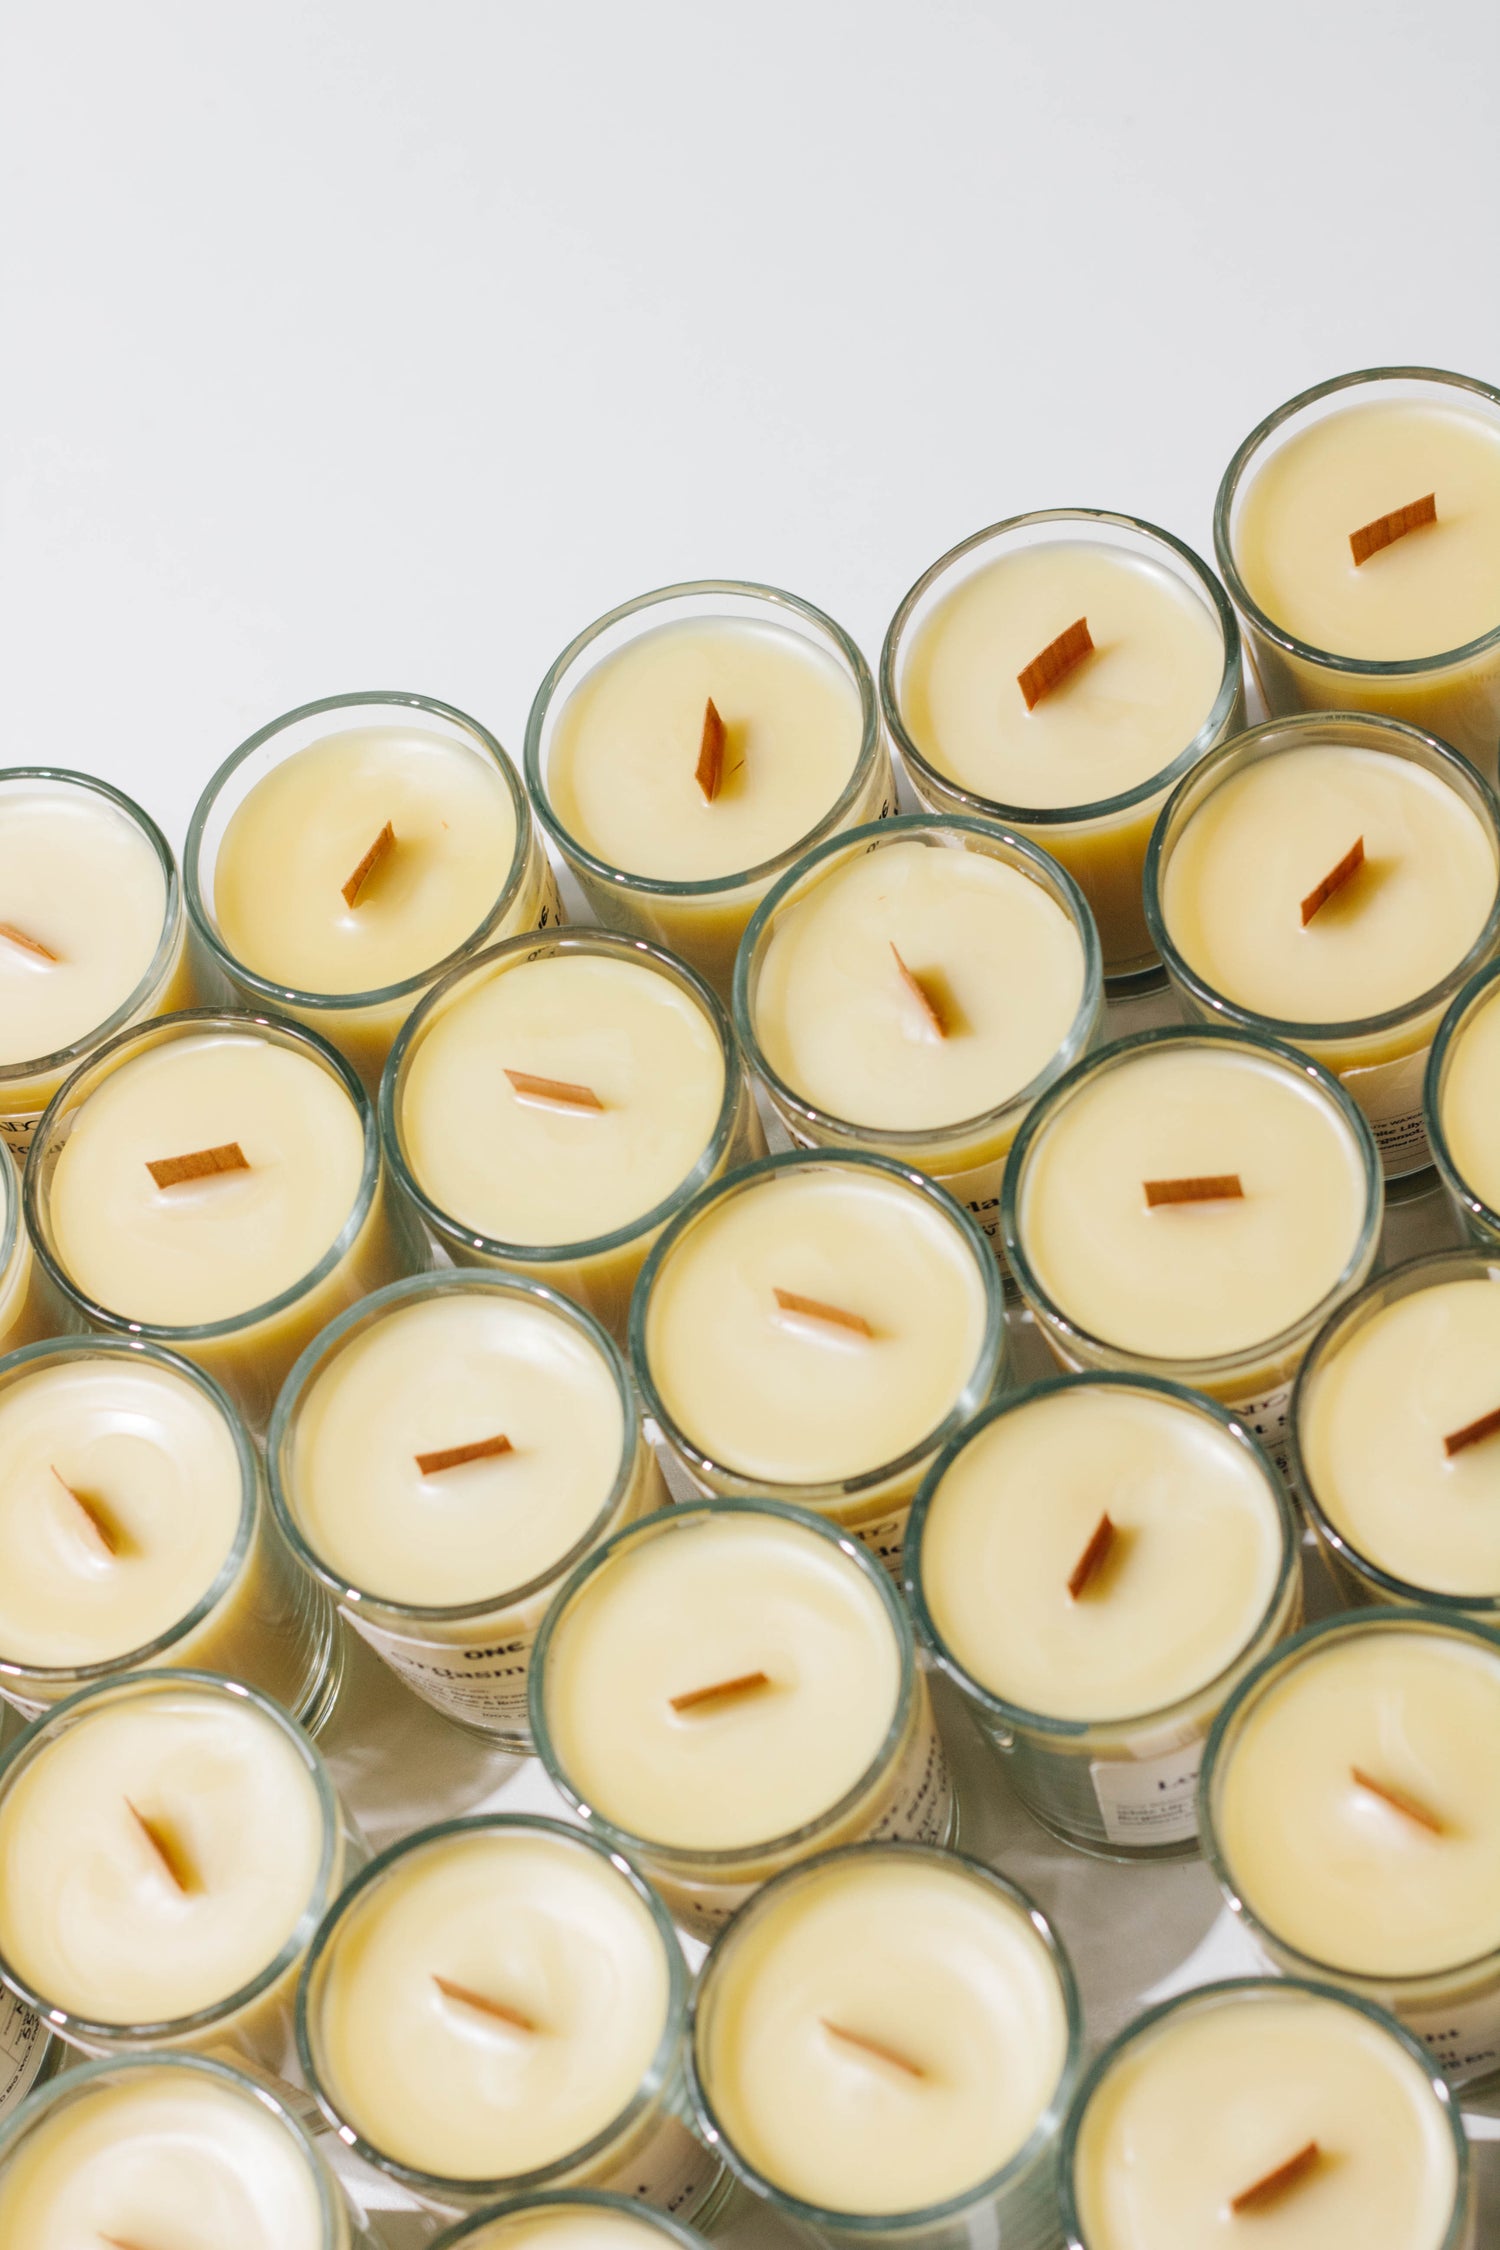 ANBO Beeswax Candles 